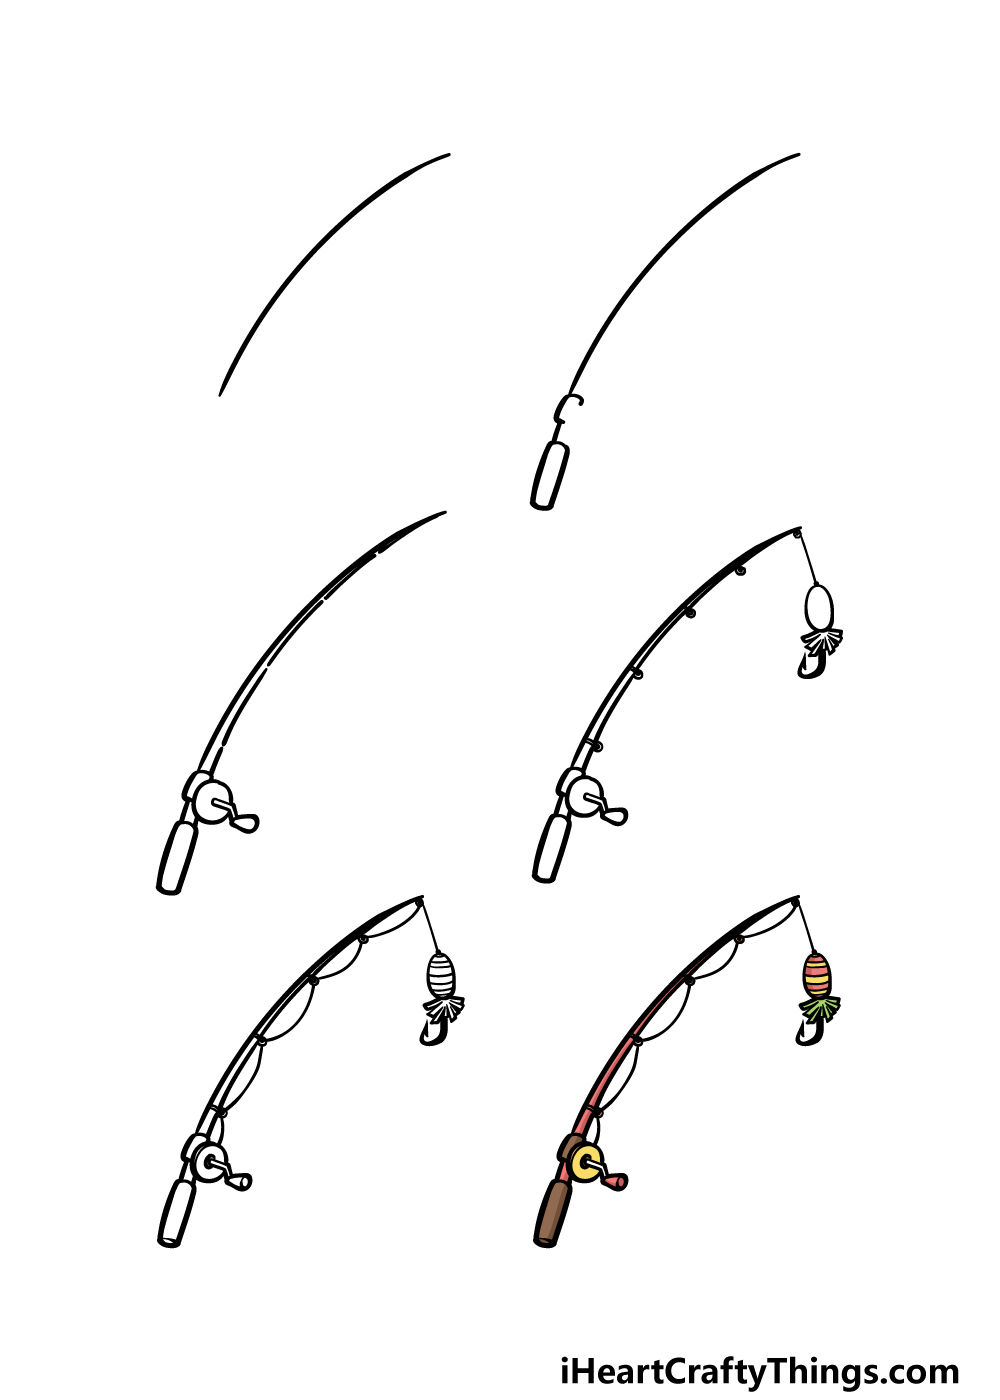 how to draw a fishing pole in 6 steps